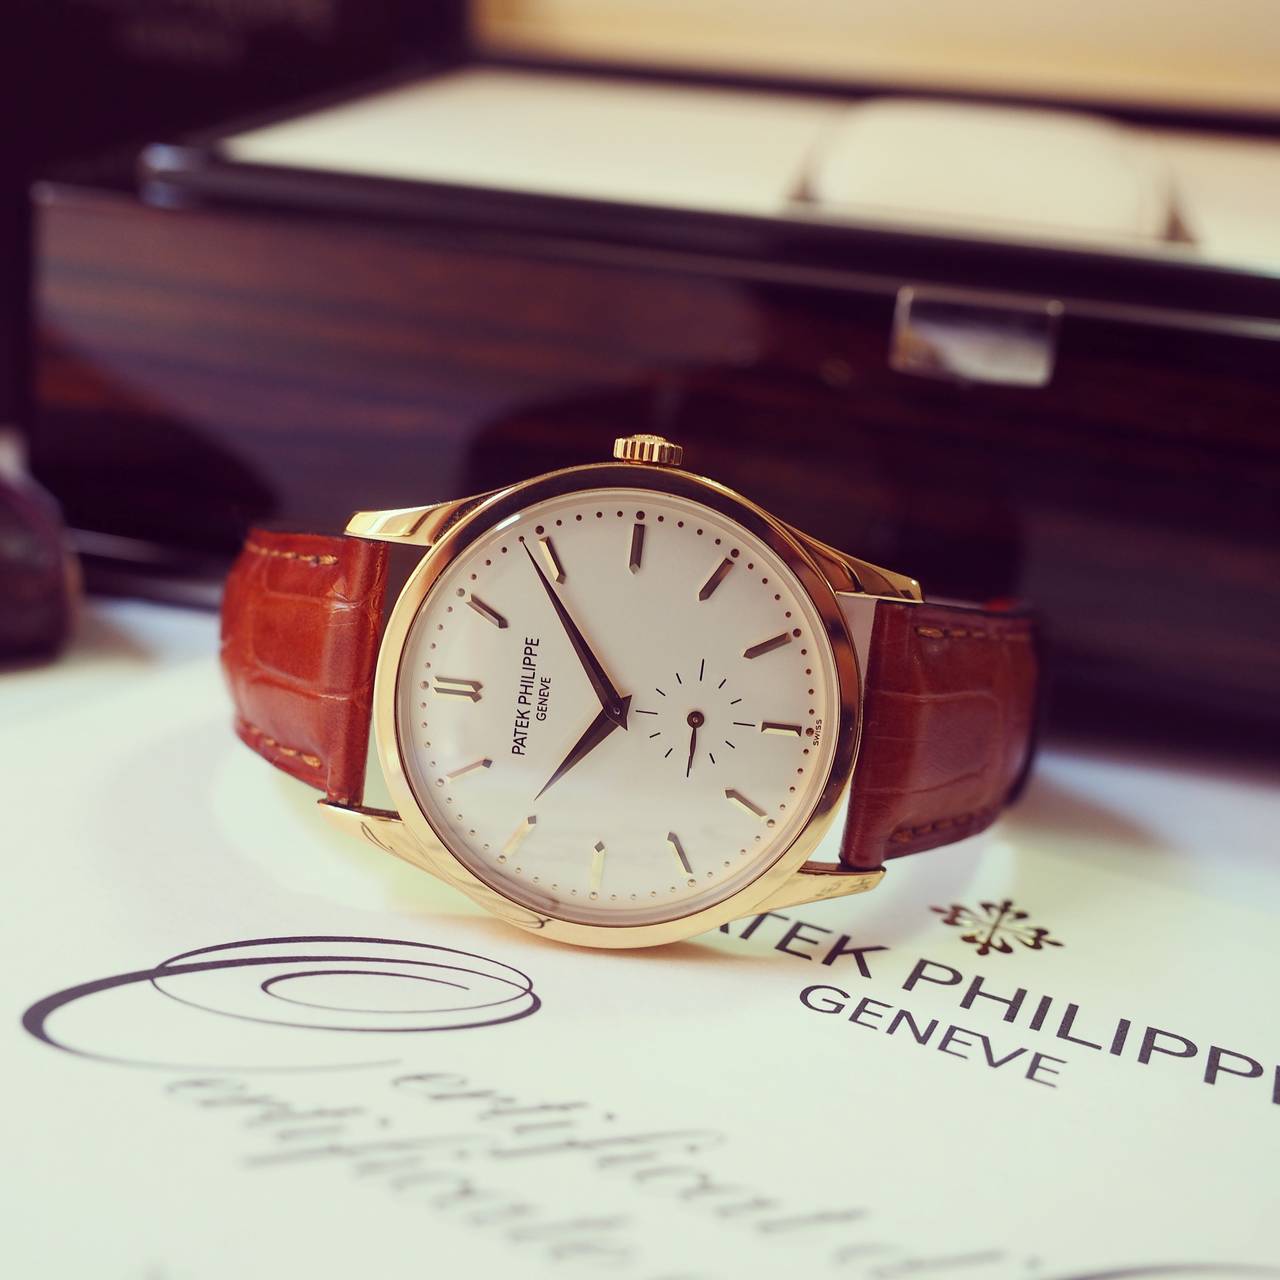 Patek Philippe
Patek Philippe Calatrava 
Ref. 5196J
18K Yellow Gold Case
Silvered Dial with Baton Indexes and Dauphin Hands
Subsidiary Seconds
18K Yellow Gold Deployante by Patek Philippe (including original buckle)
Manual Winding
Sapphire